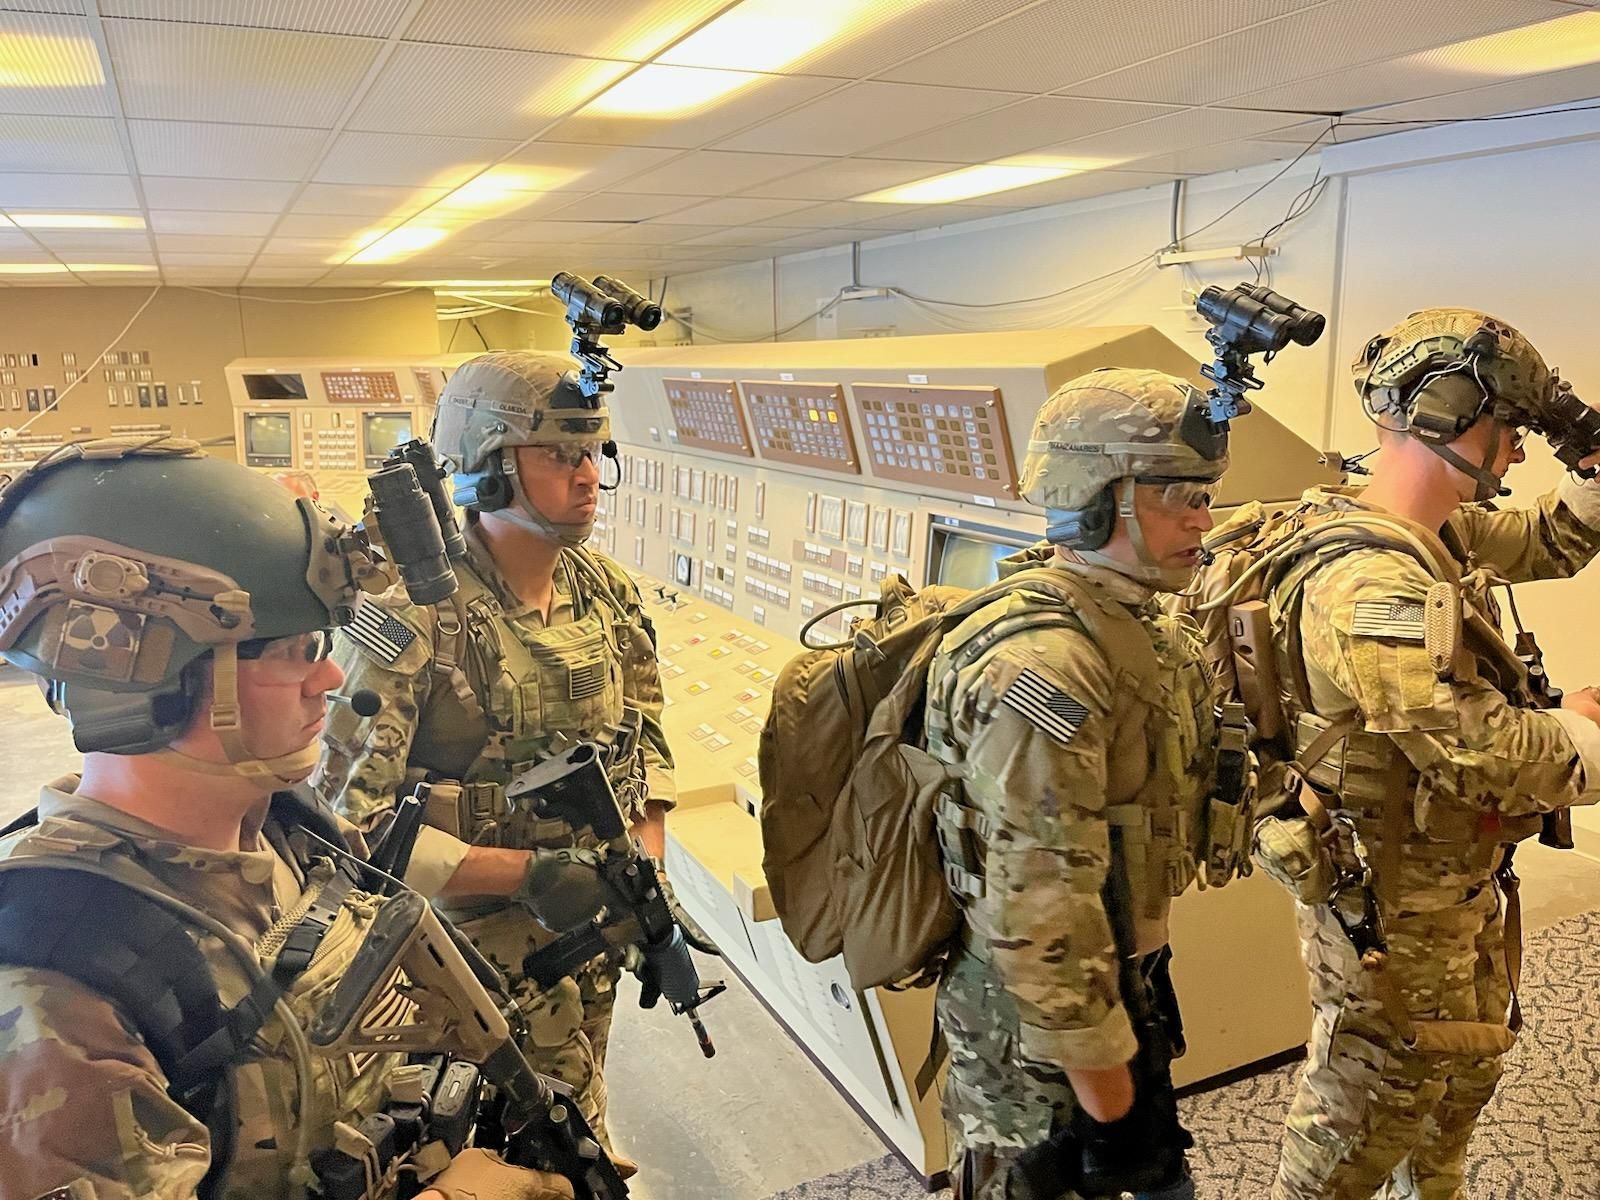 Nuclear Disablement Team 1 trained with the 5th Special Forces Group (Airborne) during an air assault exercise that took them from Fort Campbell, Kentucky, to Hollywood, Alabama, where they successfully simulated powering down the Bellefonte Nuclear Power Plant.